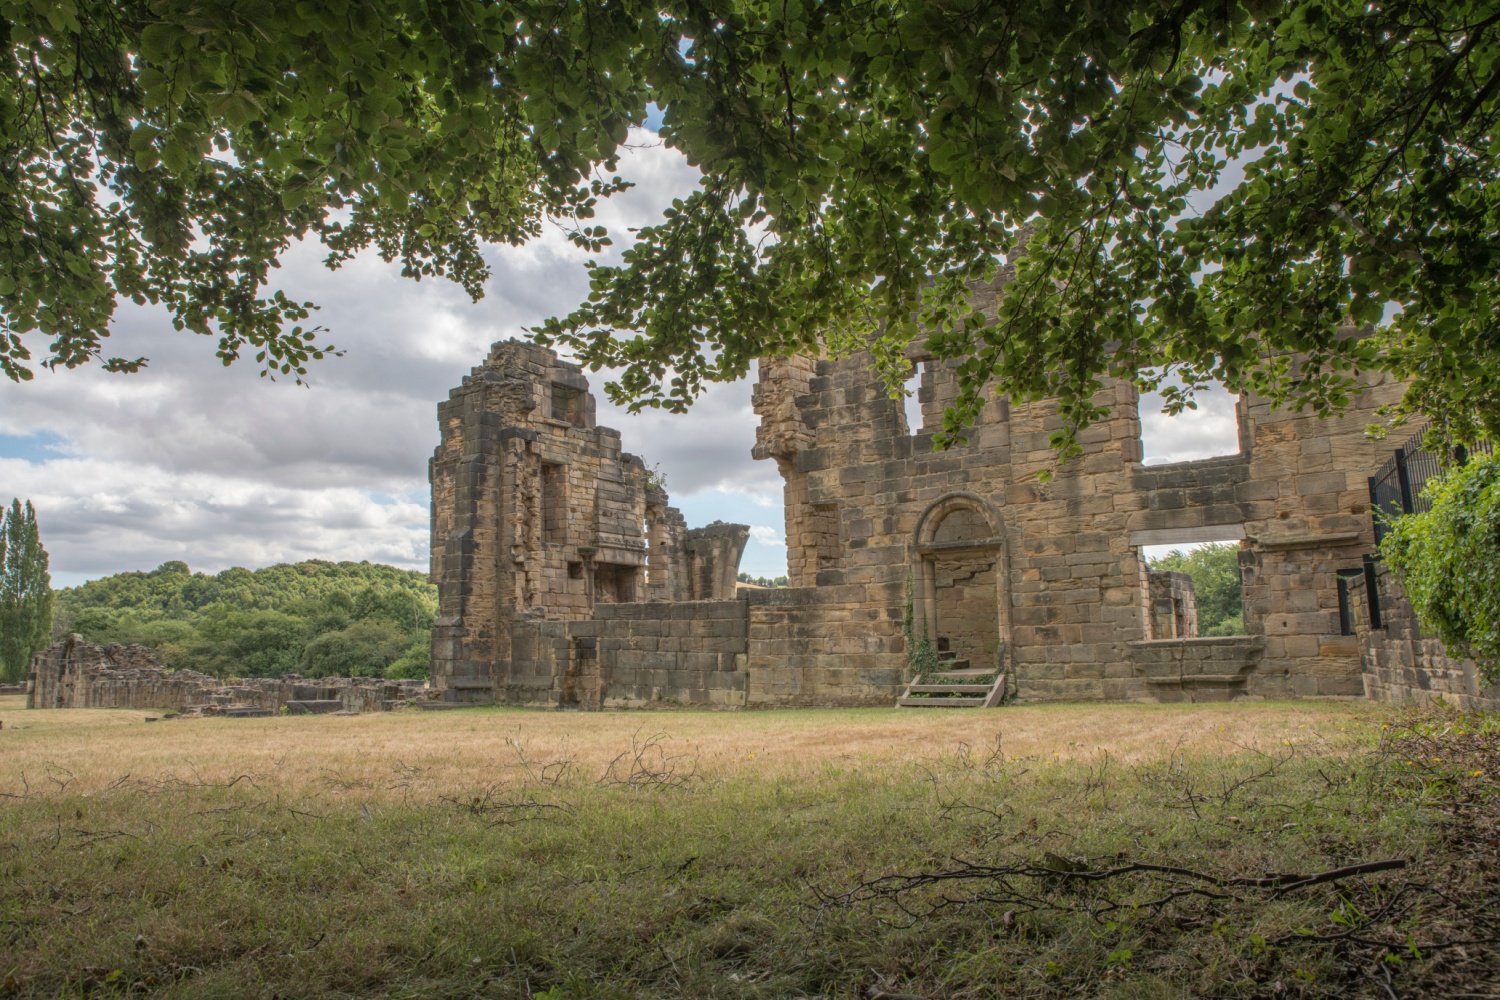 Image name monk bretton priory barnsley south yorkshire the 6 image from the post A look at the history of Monk Bretton Priory, Barnsley, with Dr Emma Wells in Yorkshire.com.